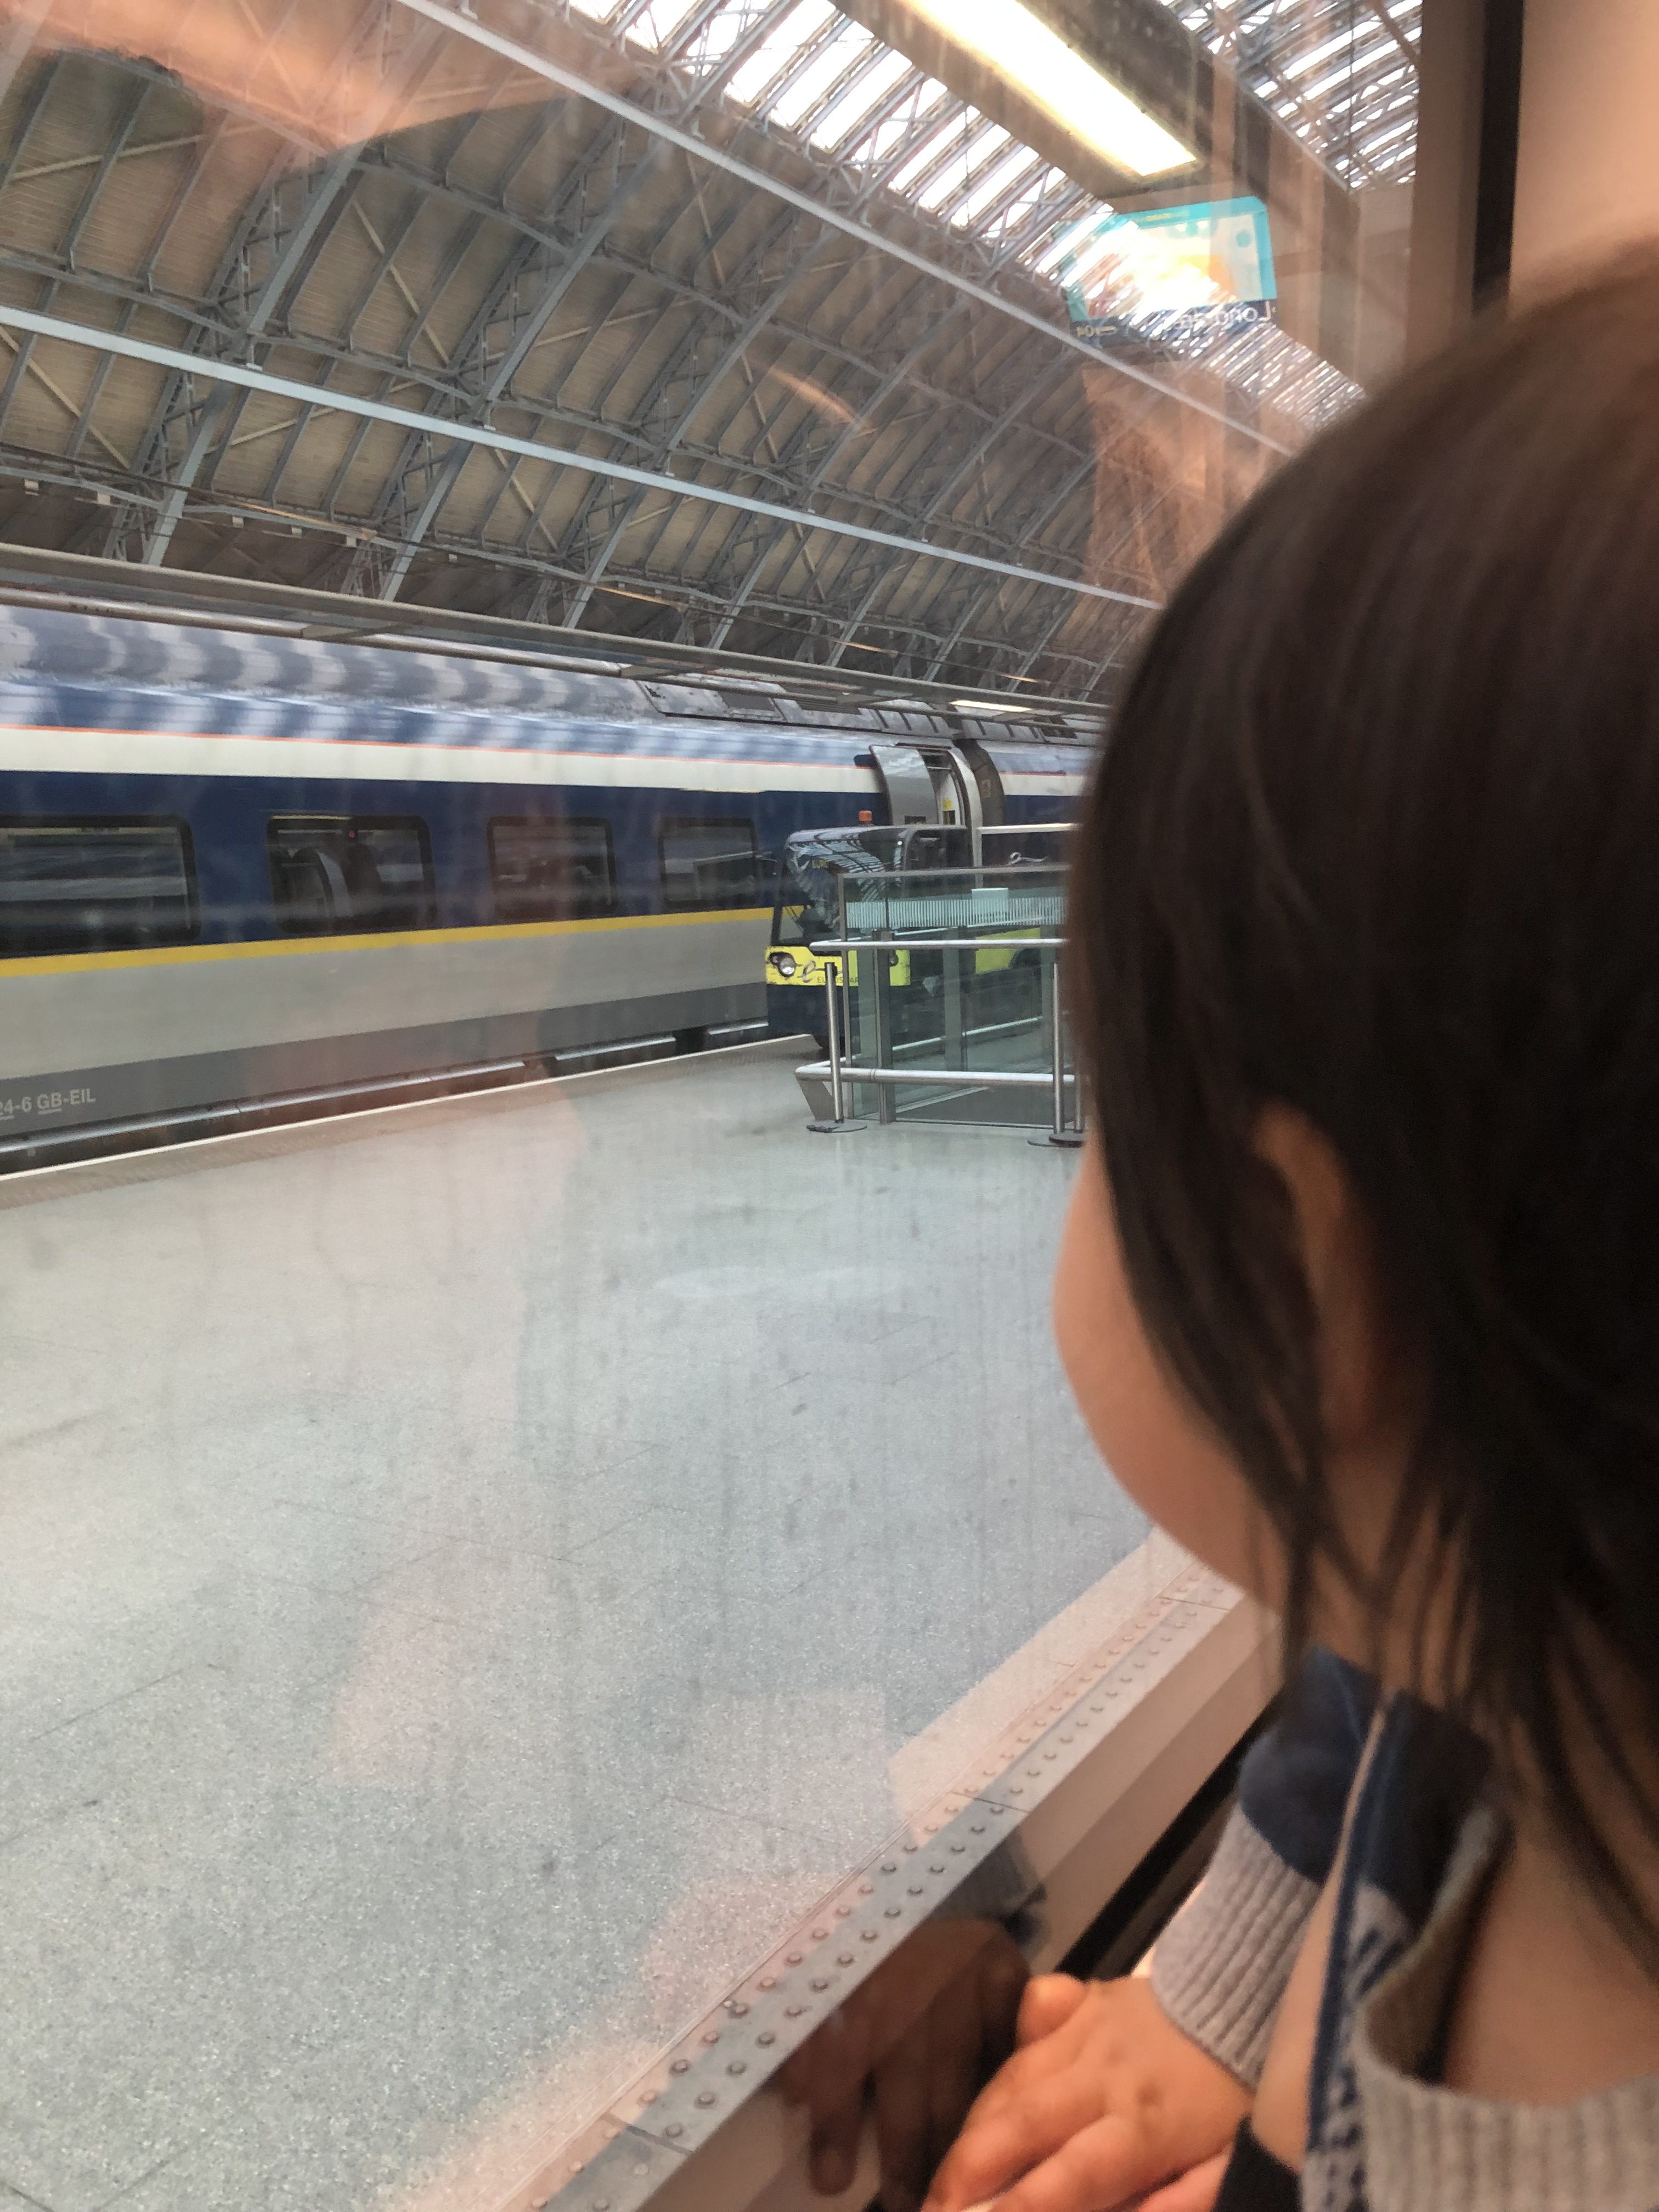 A child looks out the window of a train.